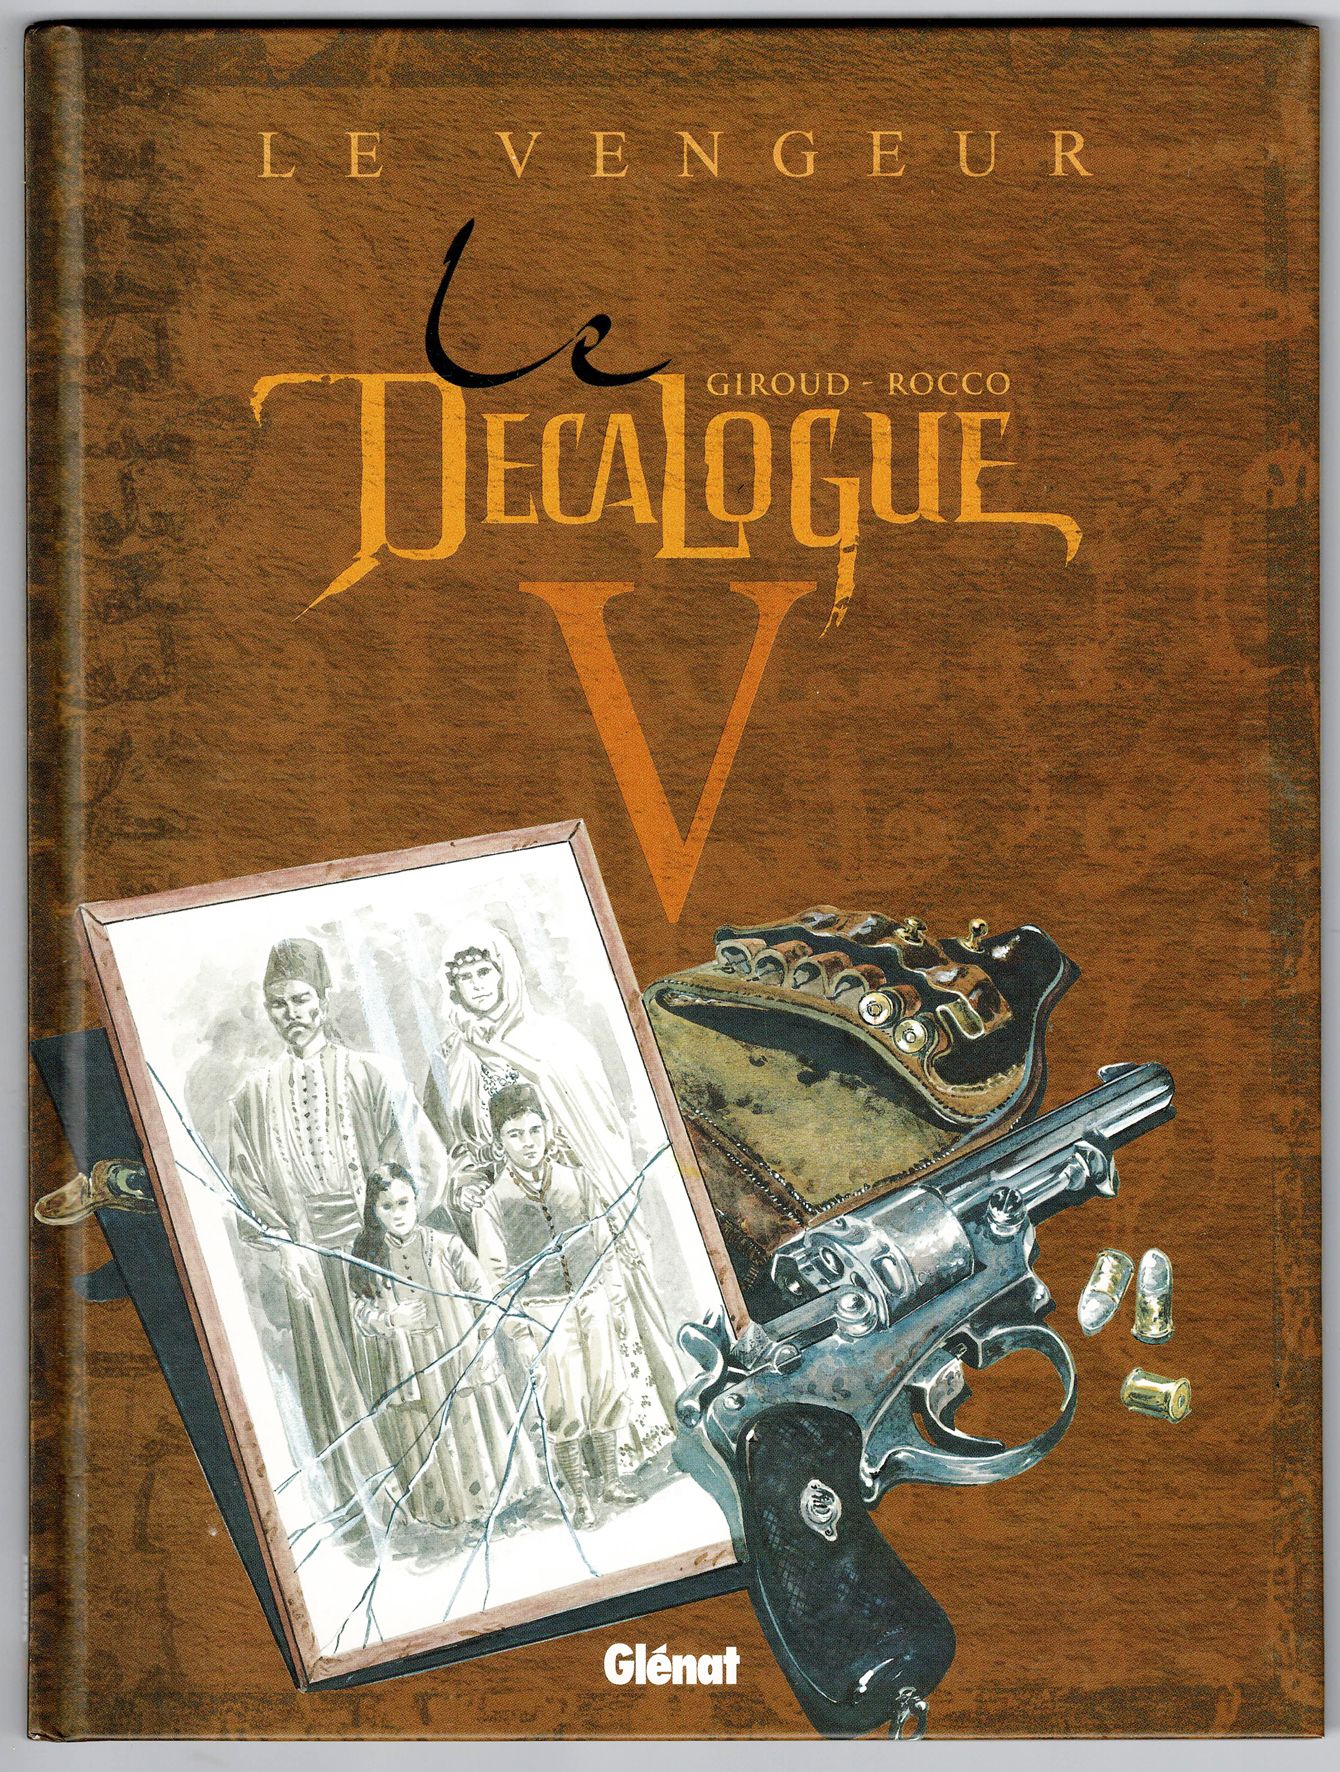 Le décalogue 
Volumes 5, 6, 7, 9, 10 and special issues. Set of 6 albums in firs&hellip;